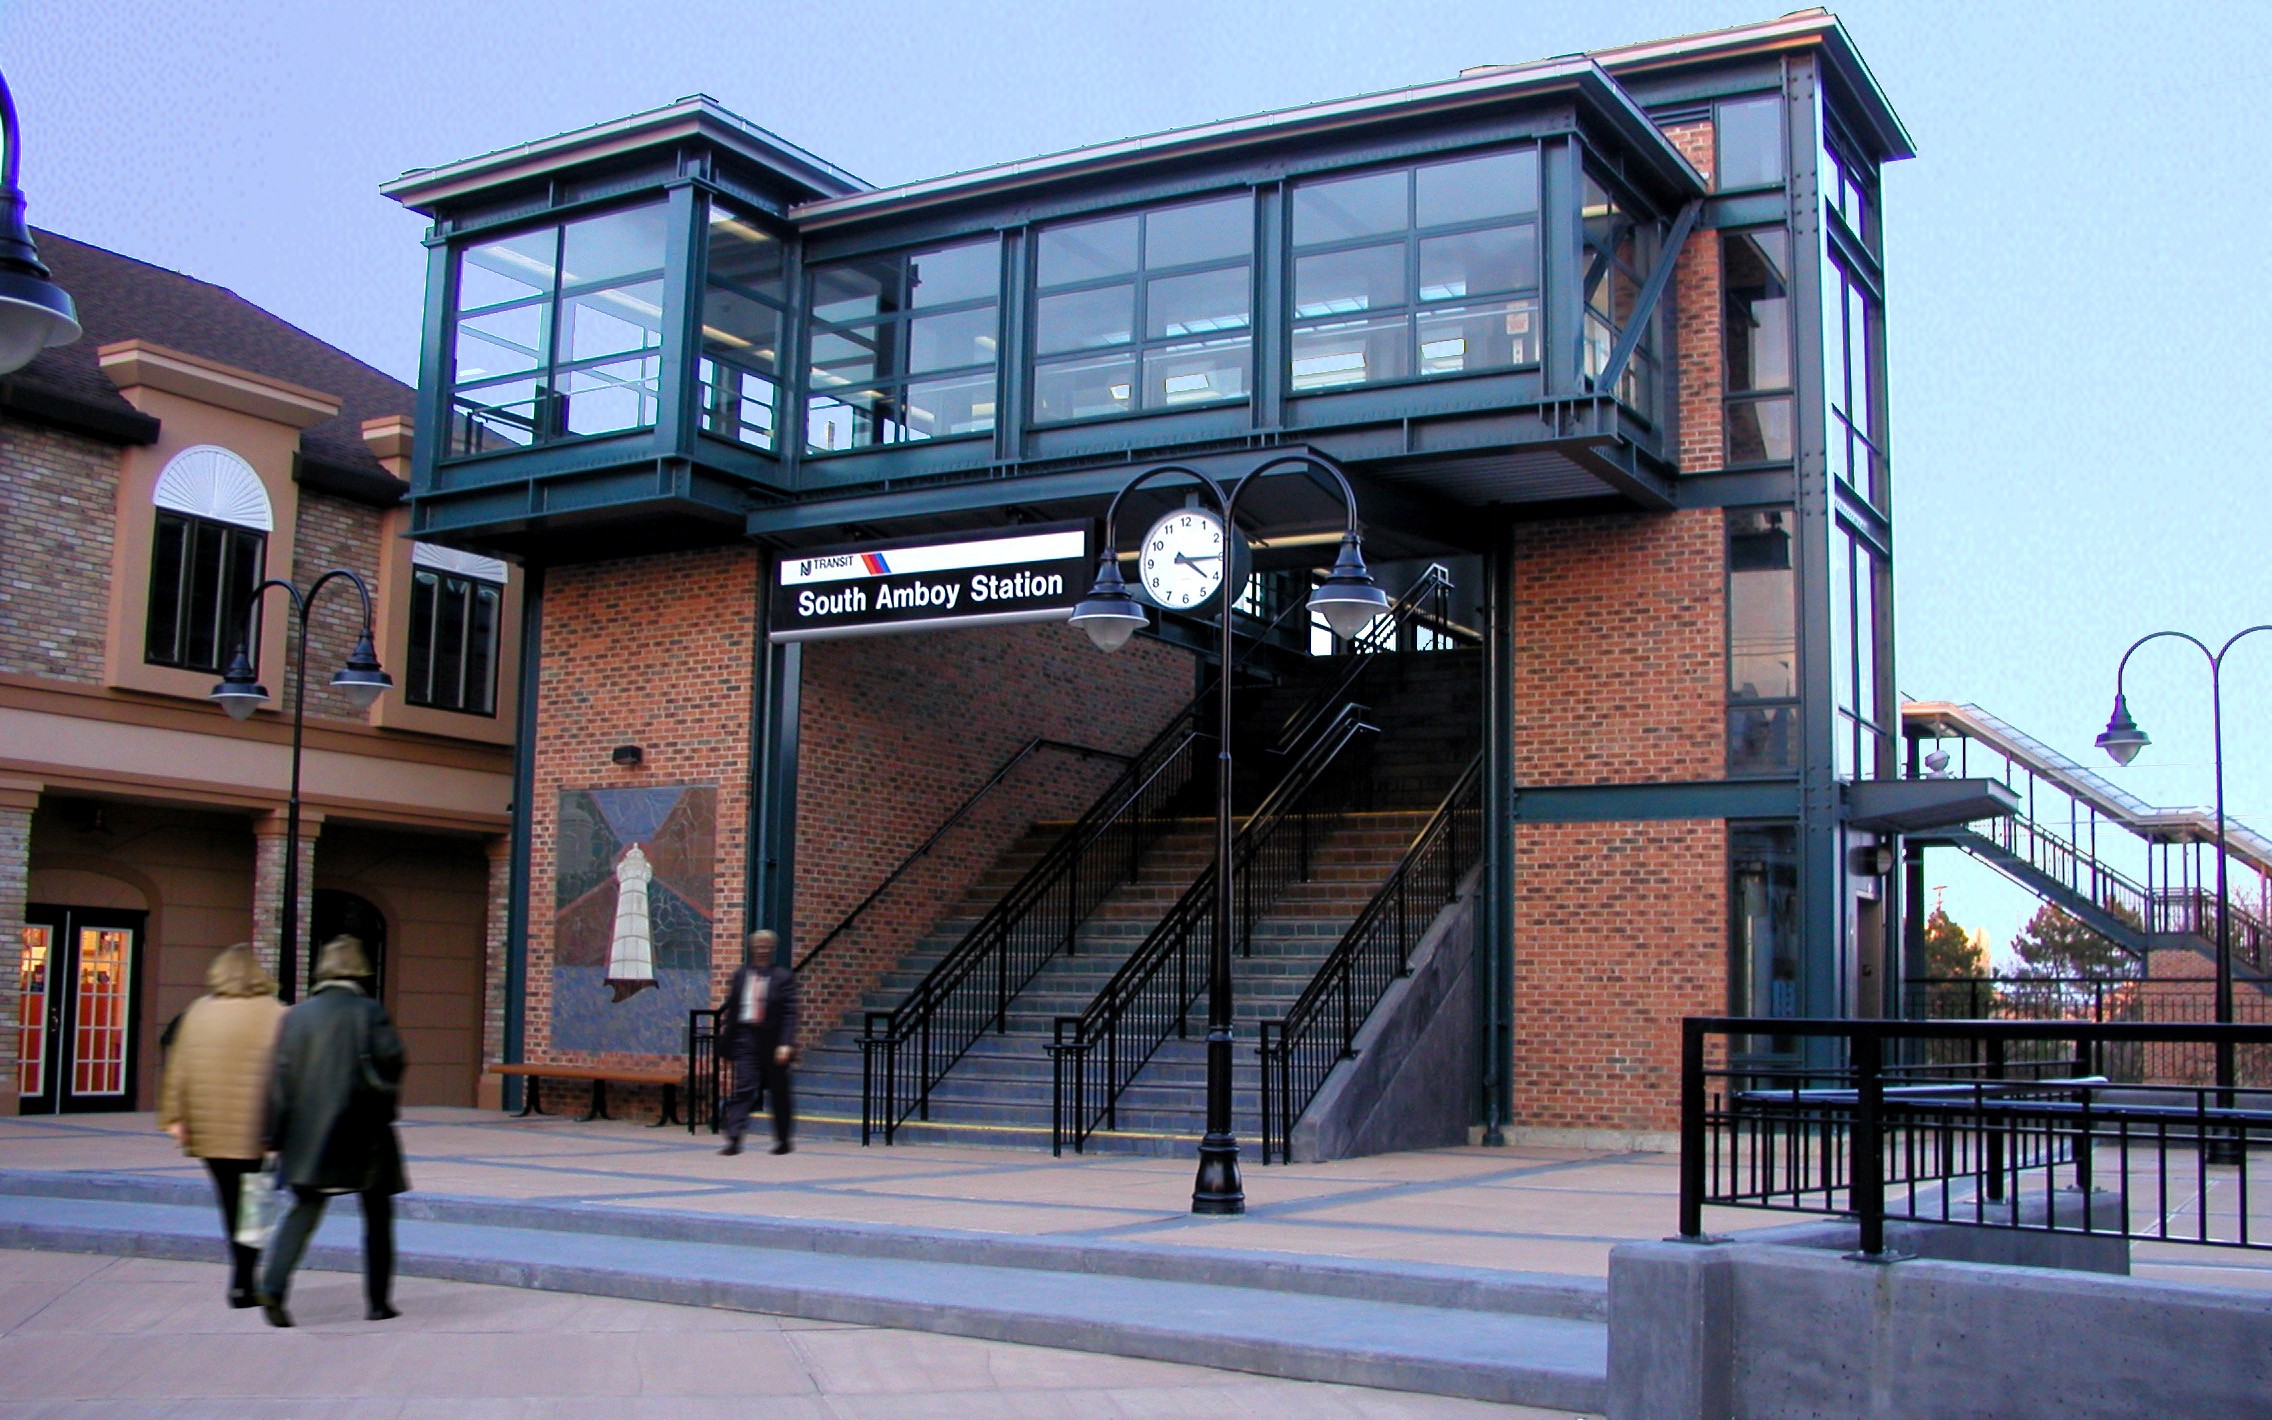 Commuters entering South Amboy Station via the new urban plaza